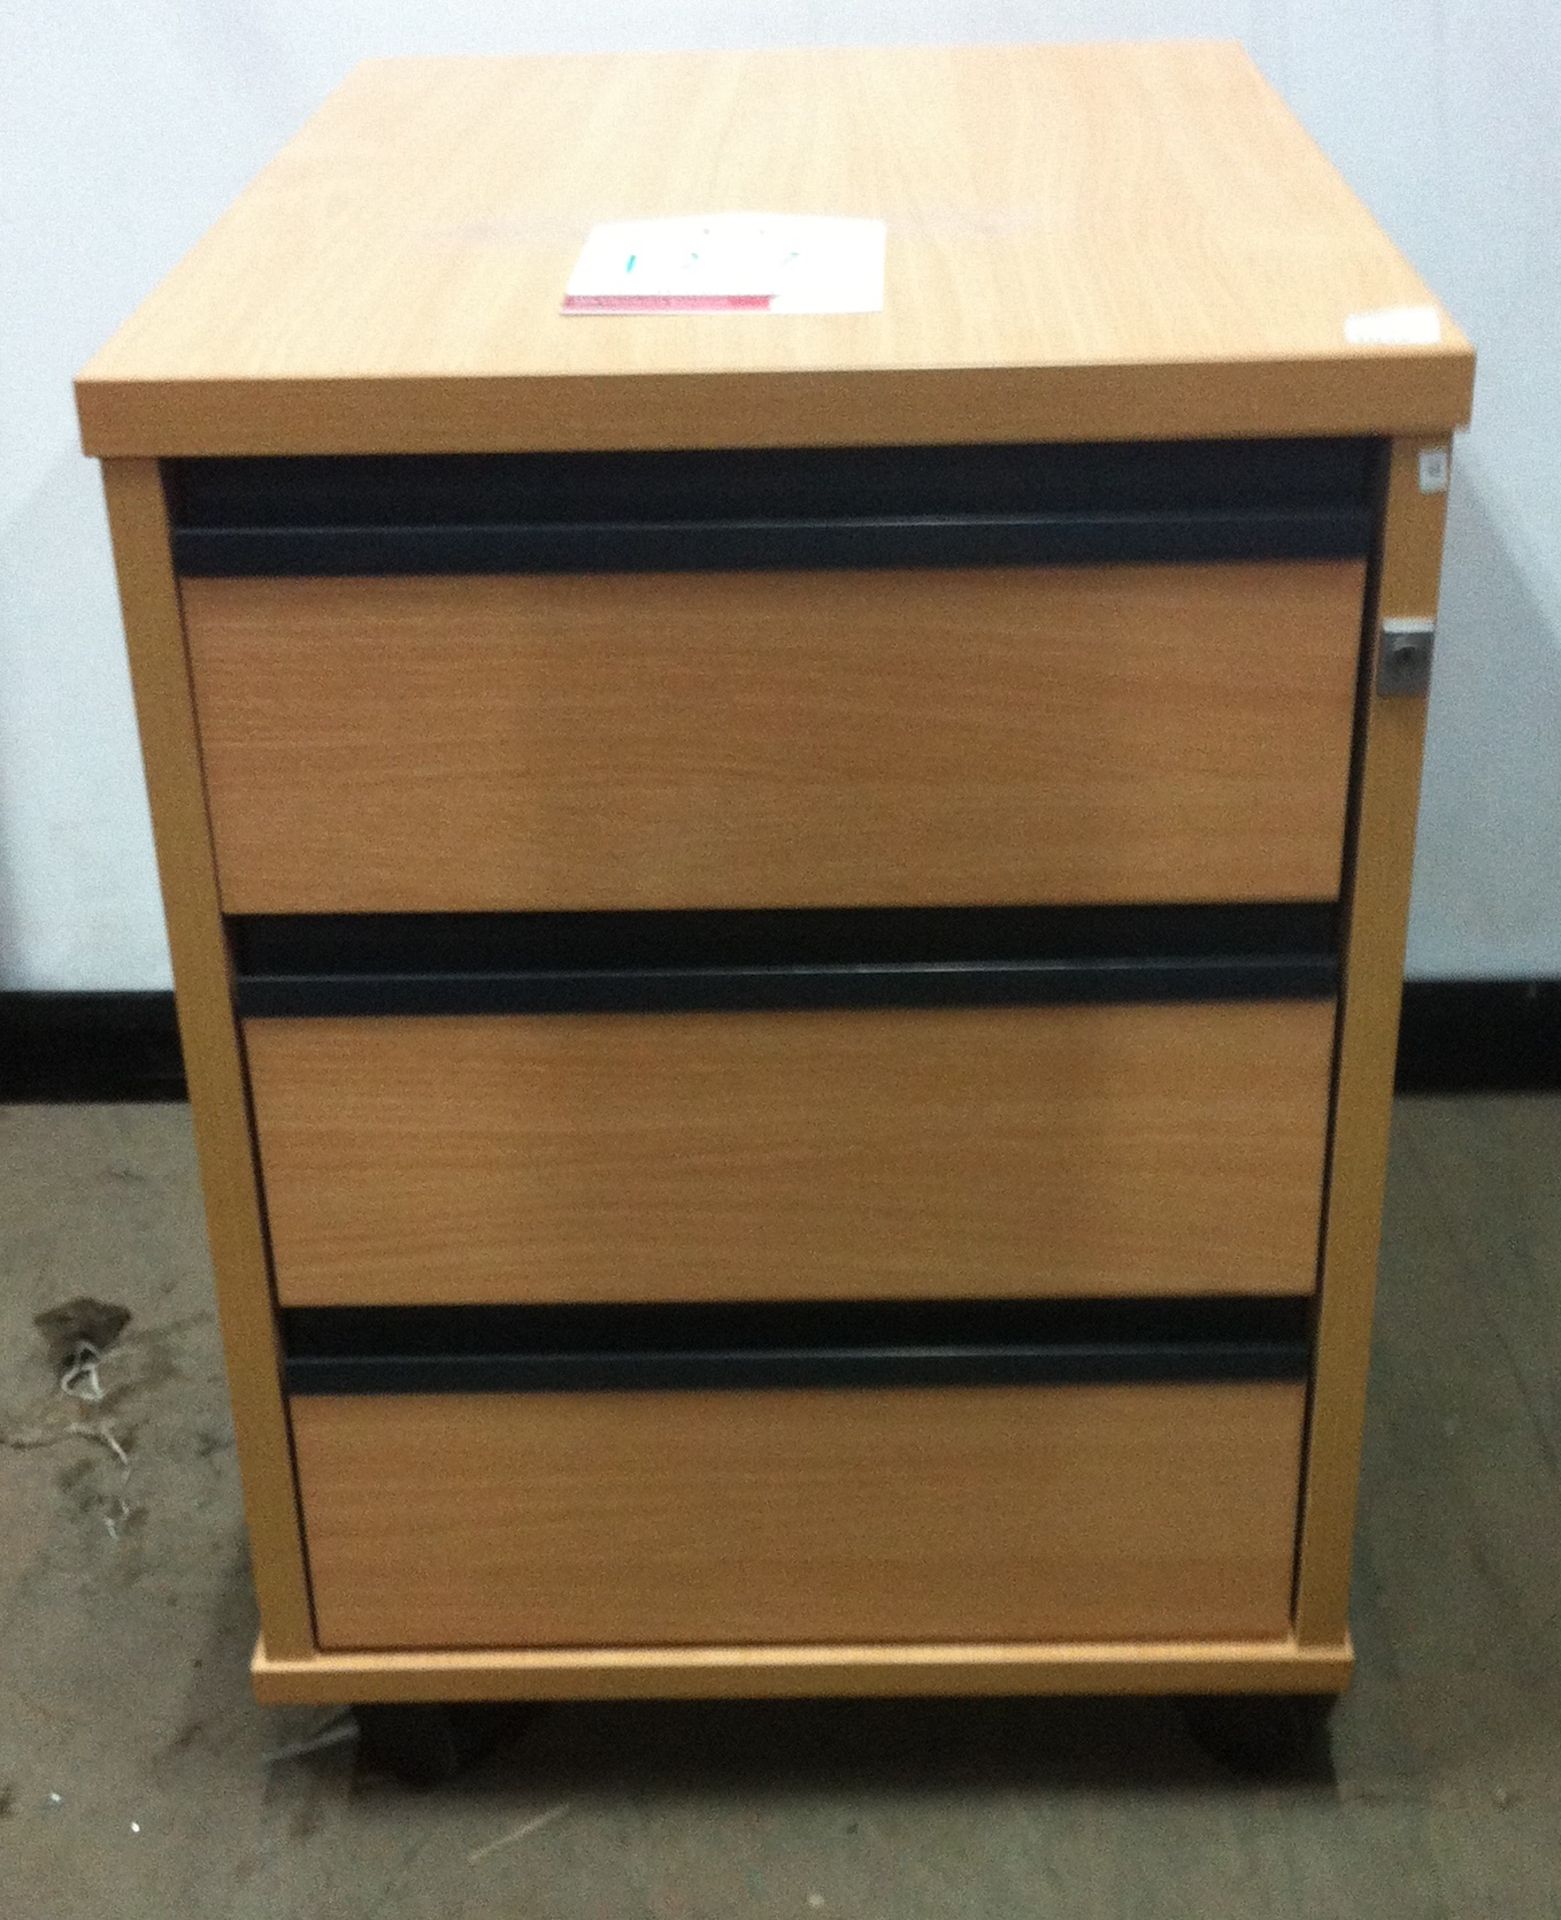 6x 3 Drawer Wooden Filing Cabinet